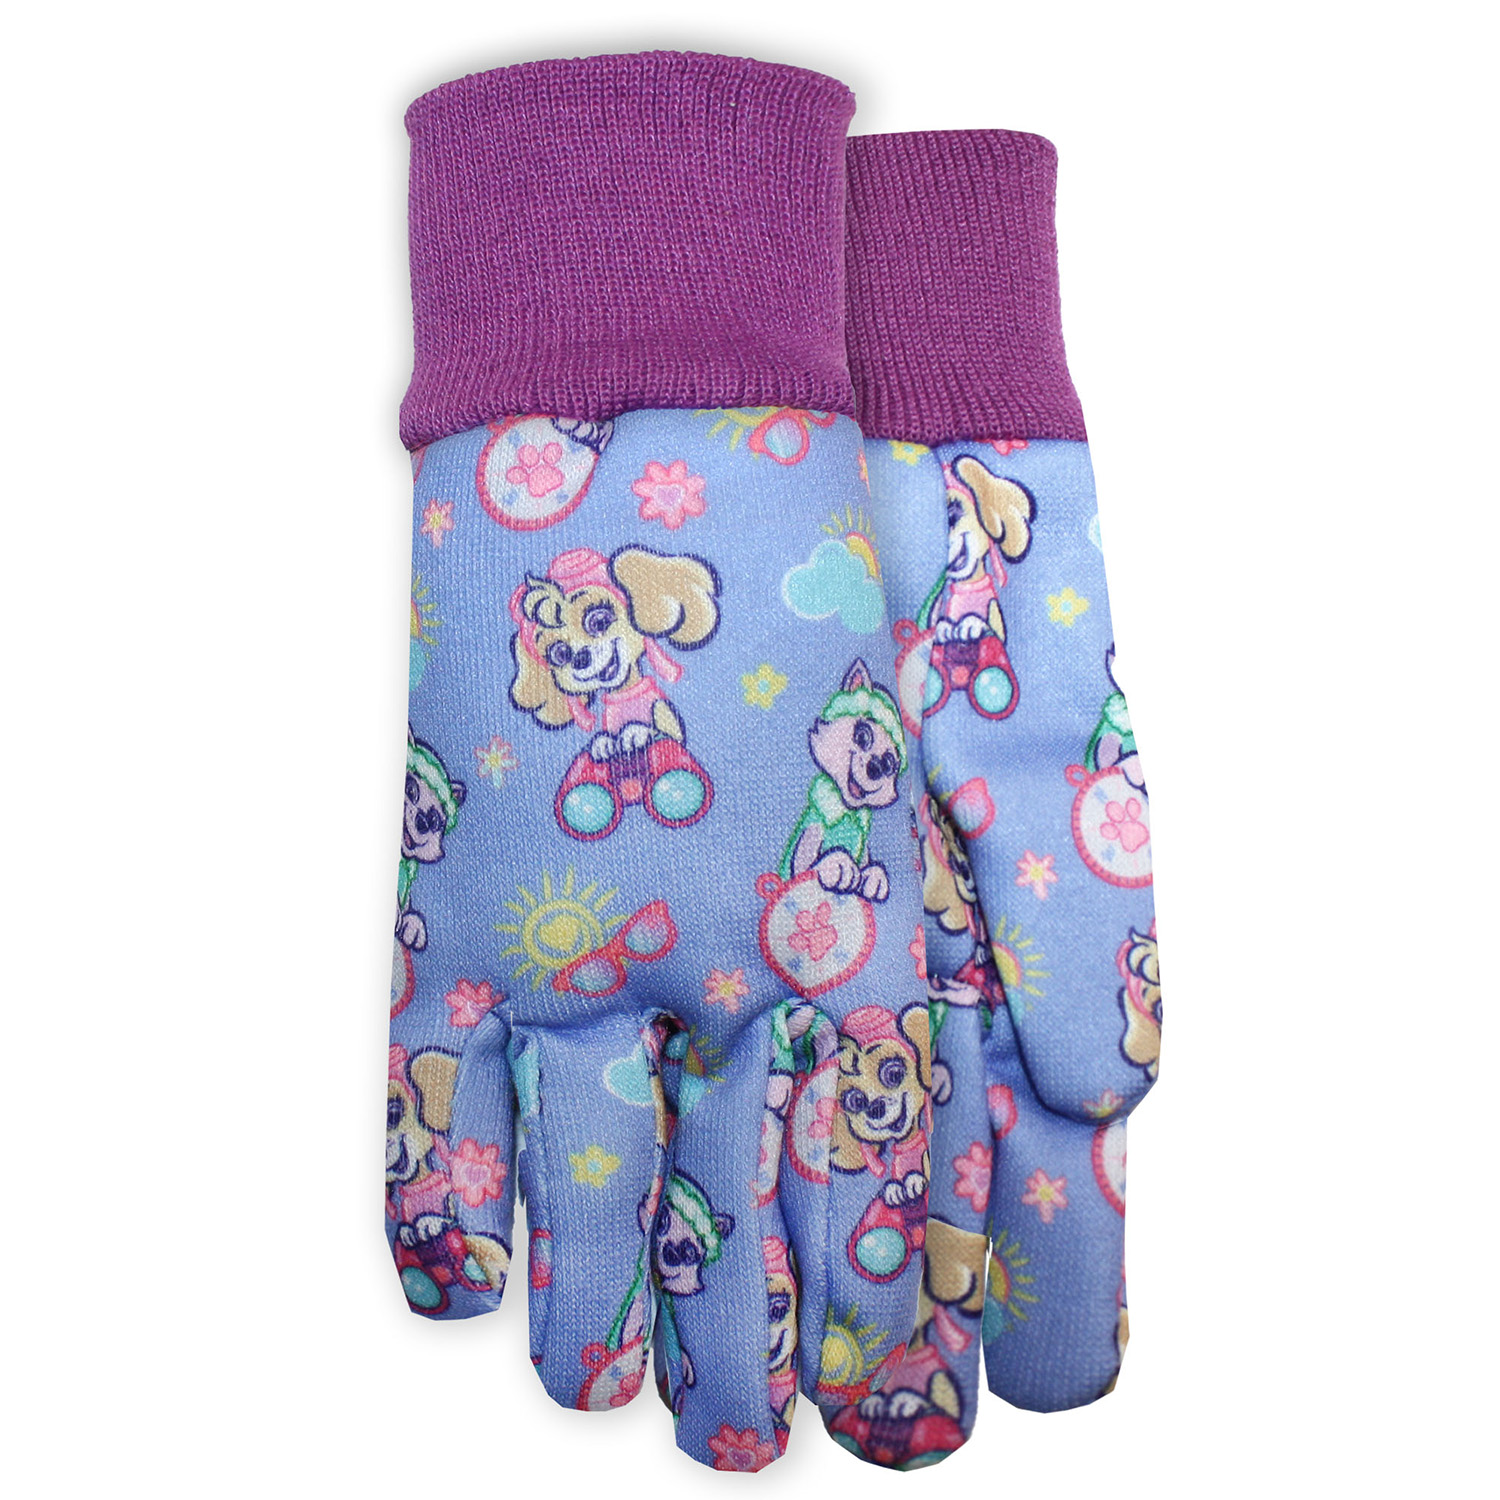 MidWest Gloves & Gear Paw Patrol Pink Toddler Sized Jersey Glove, Gender Neutral - image 1 of 3